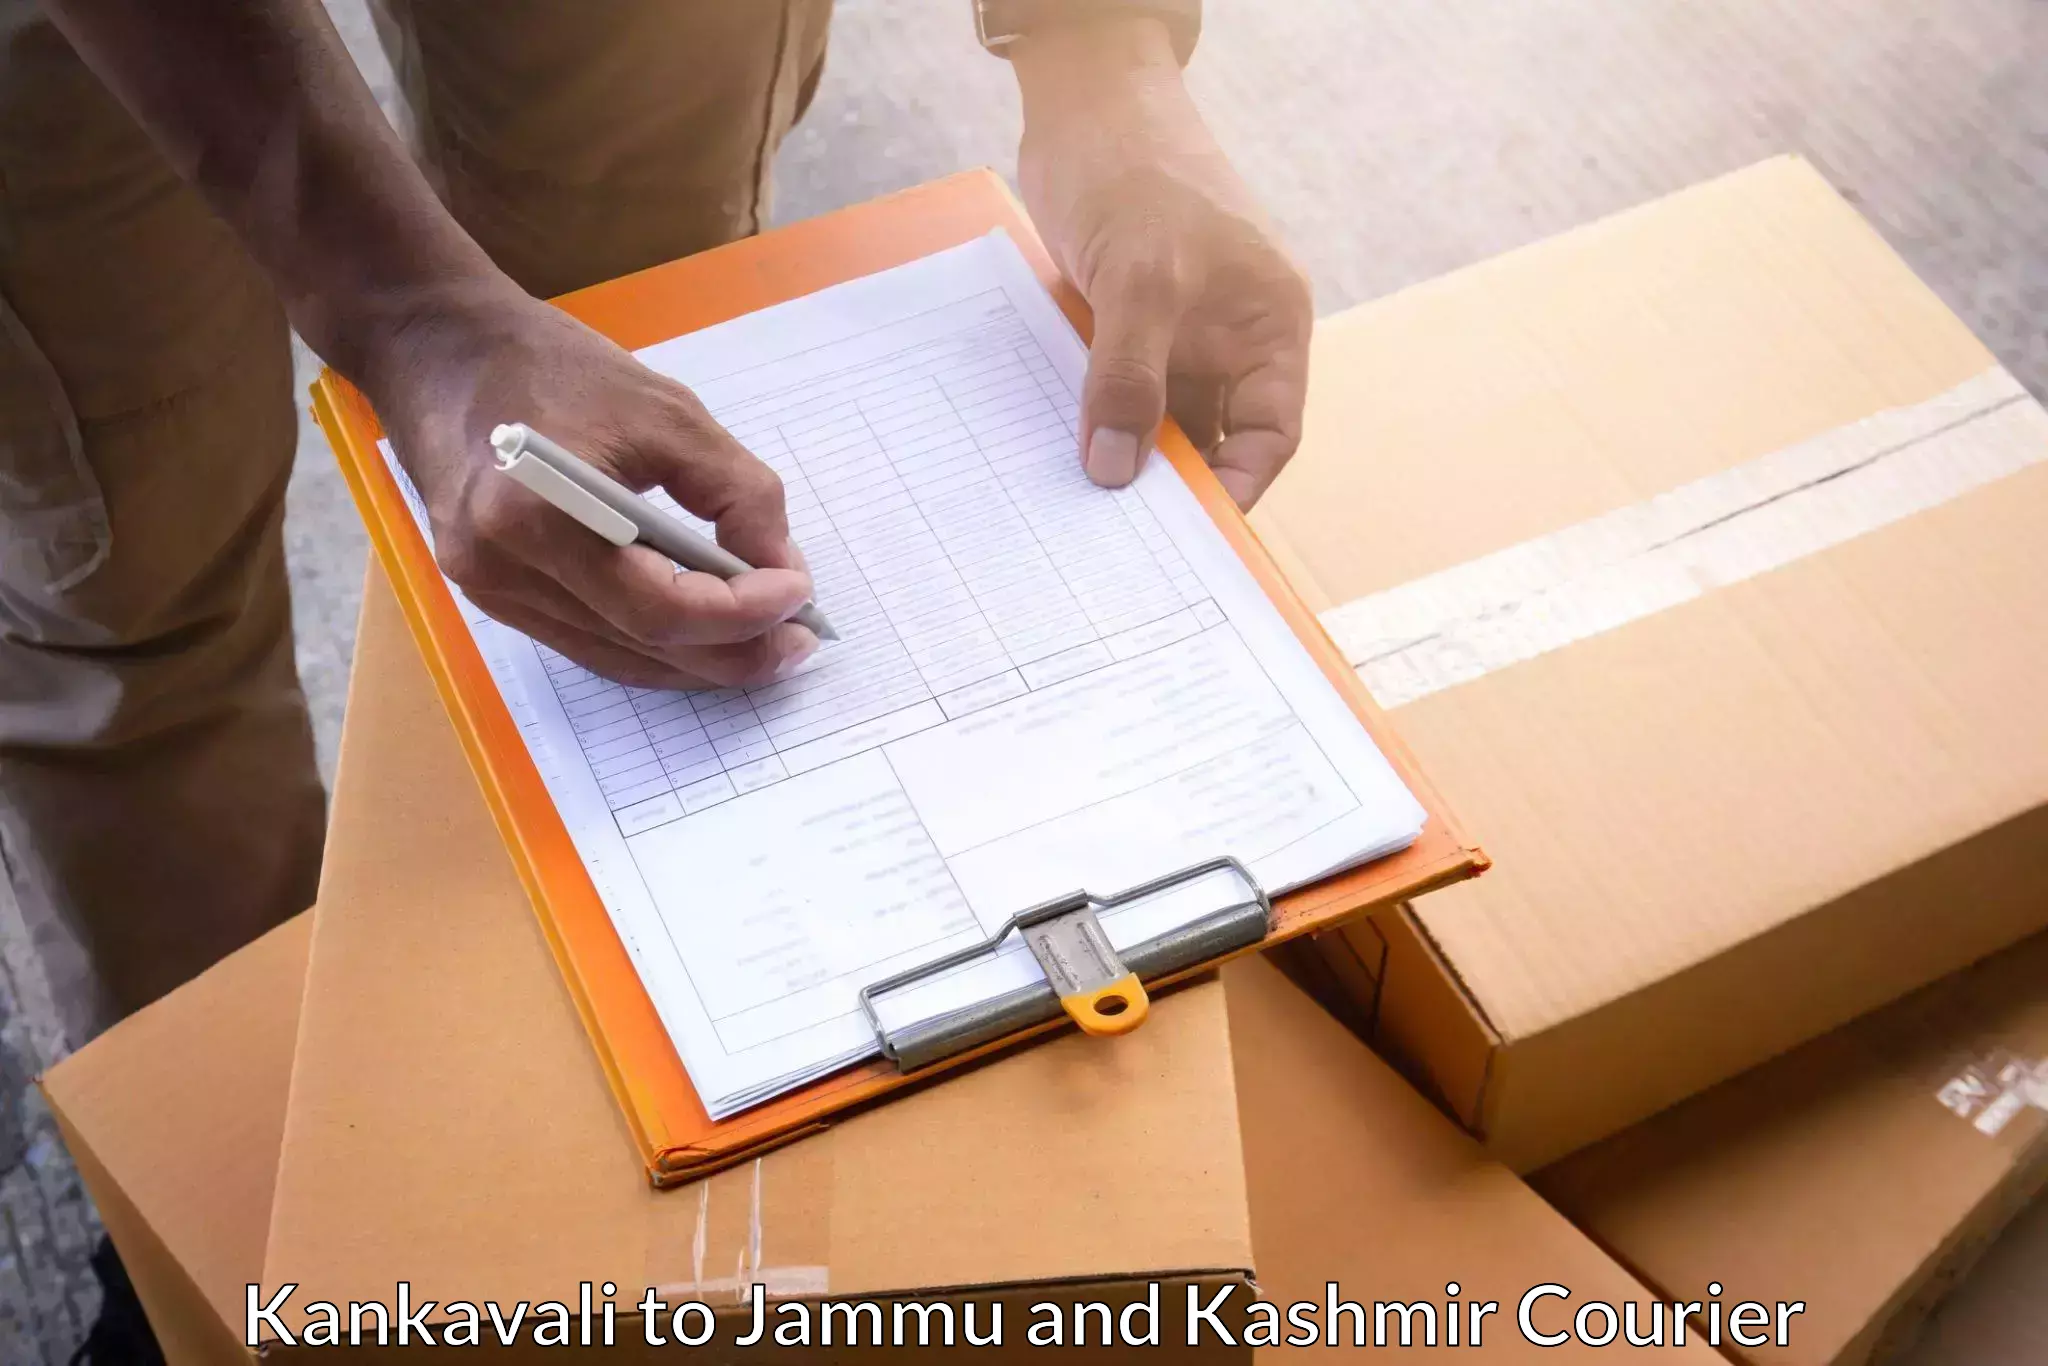 Parcel handling and care Kankavali to University of Jammu